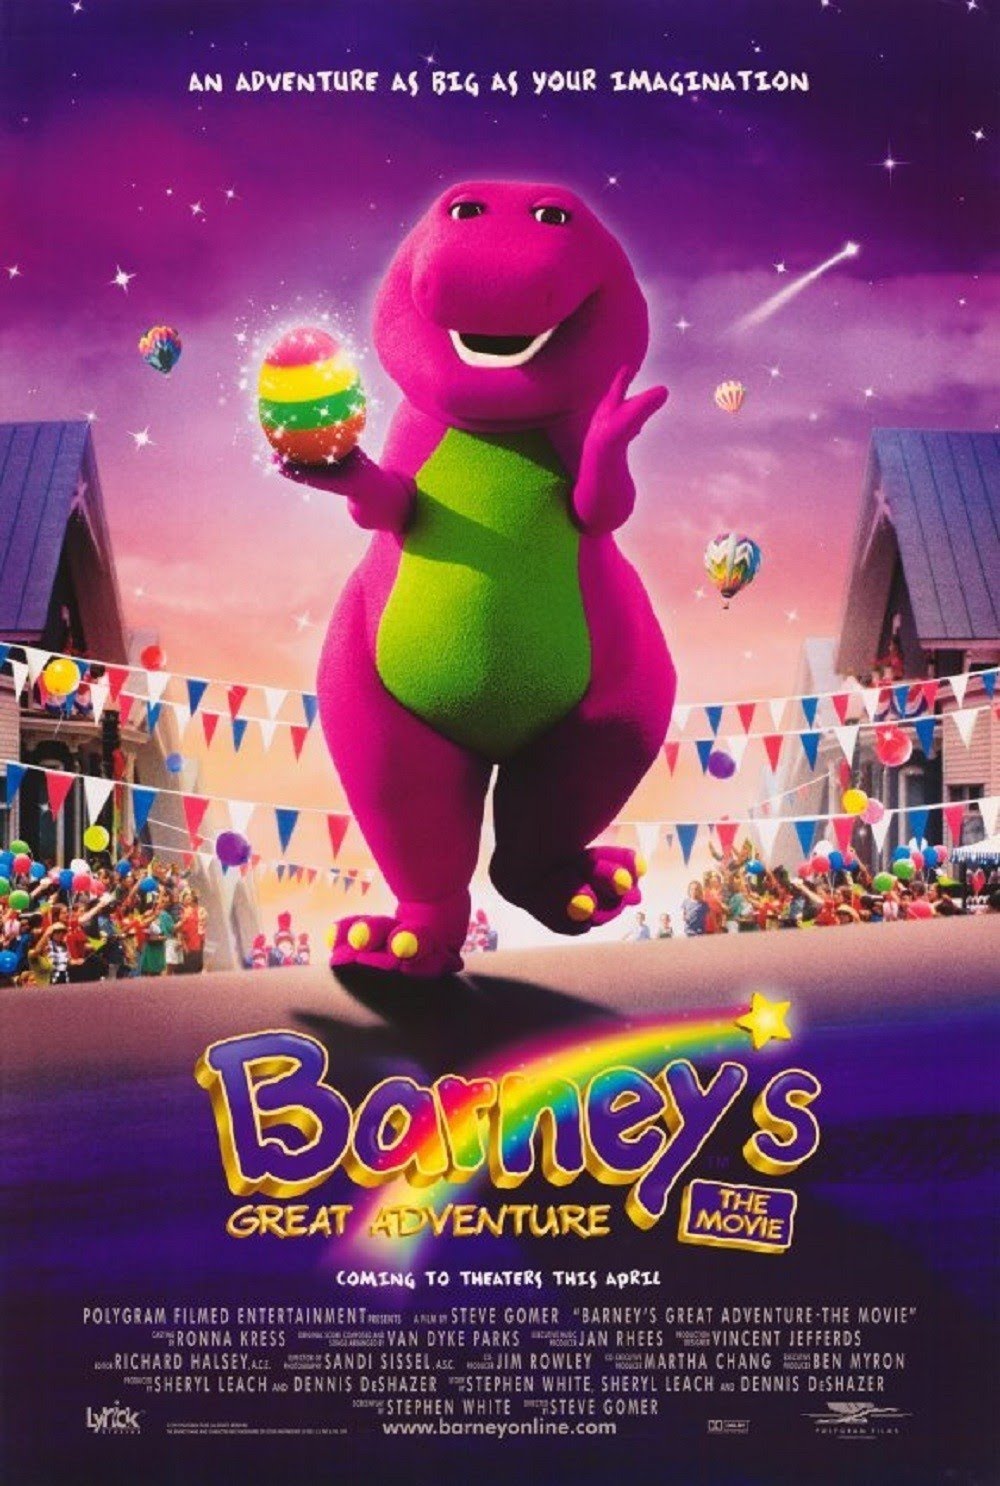 Barney The Hollywood Movie is cool